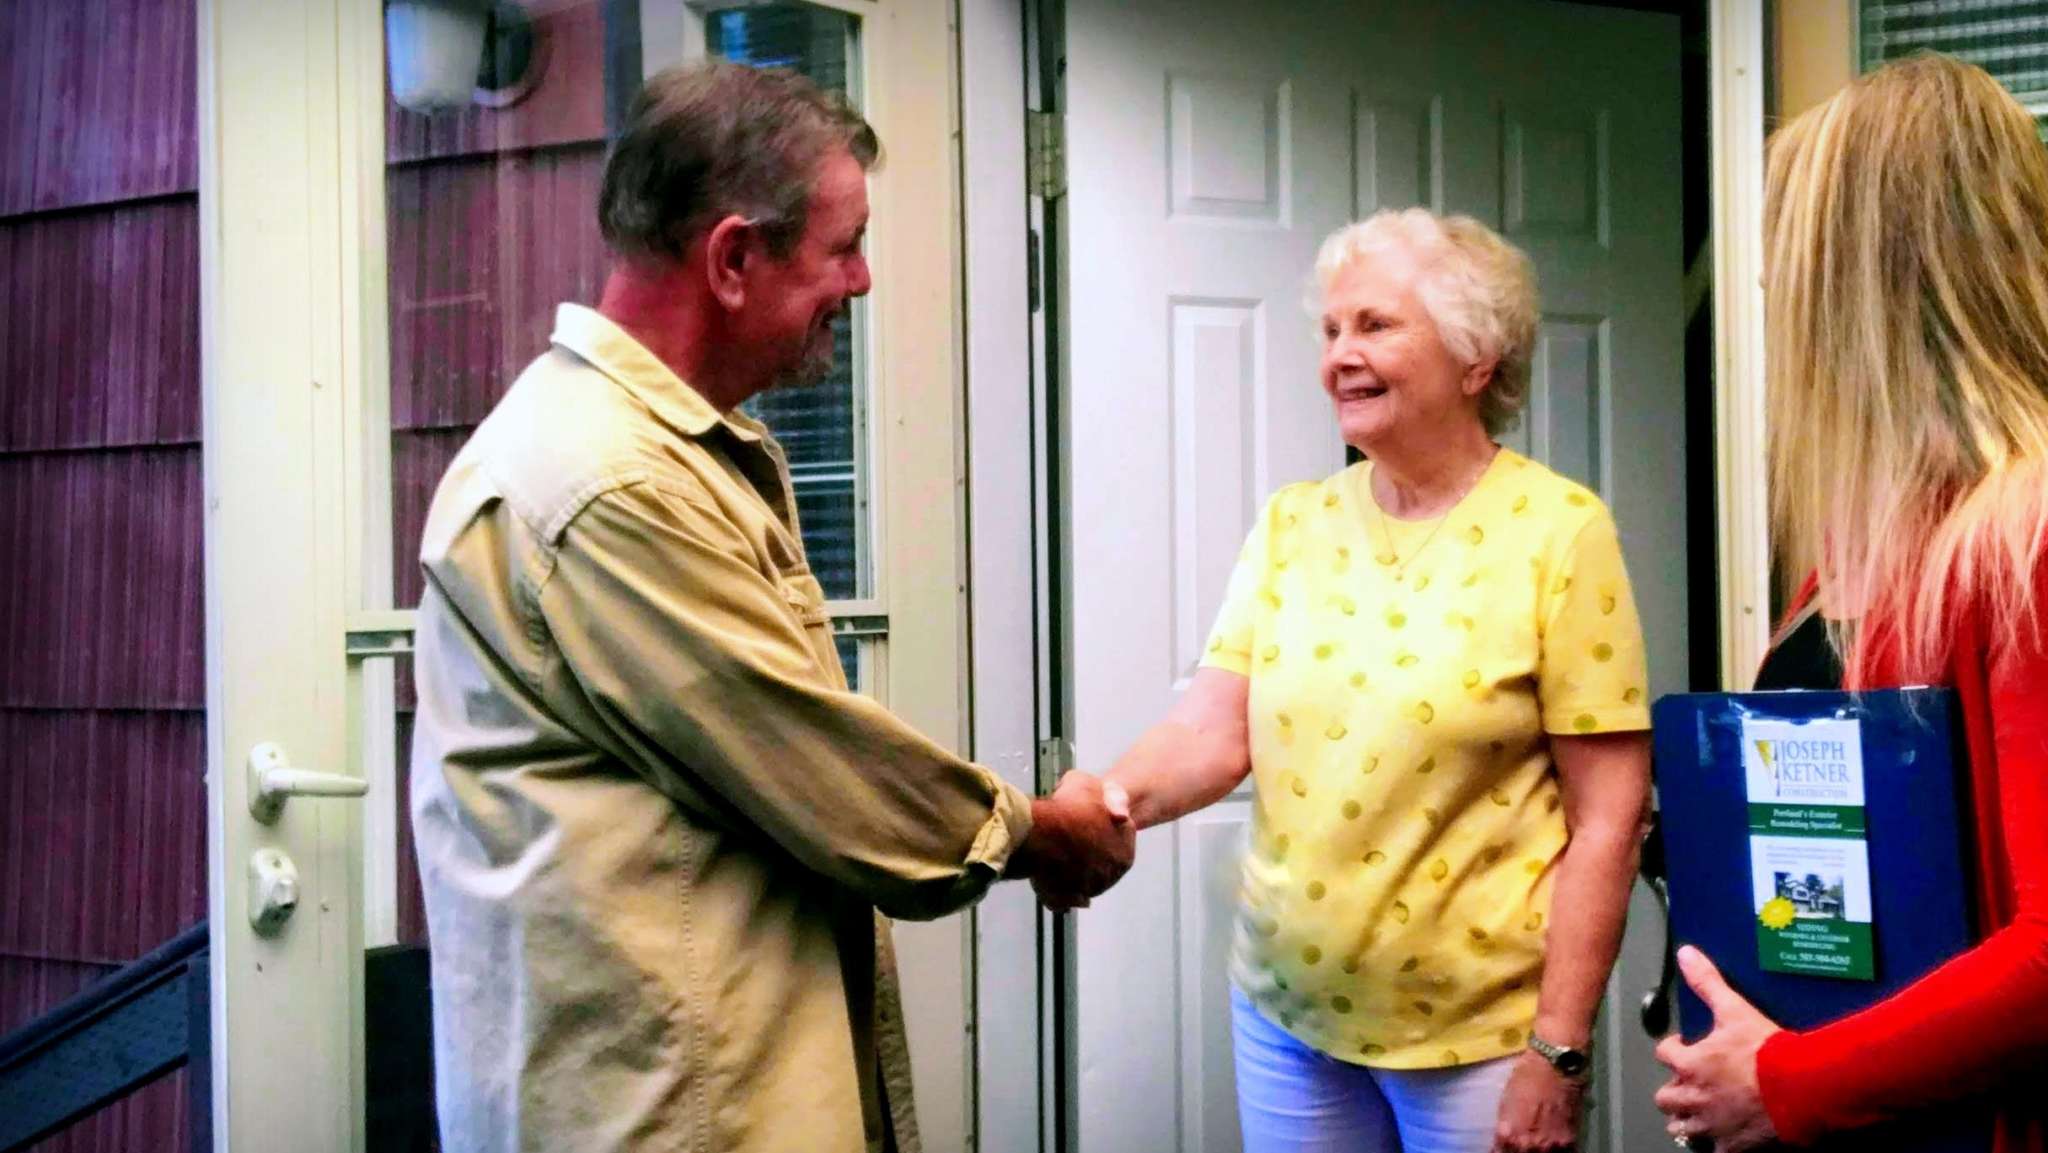 Two people shaking hands at the front door of a home